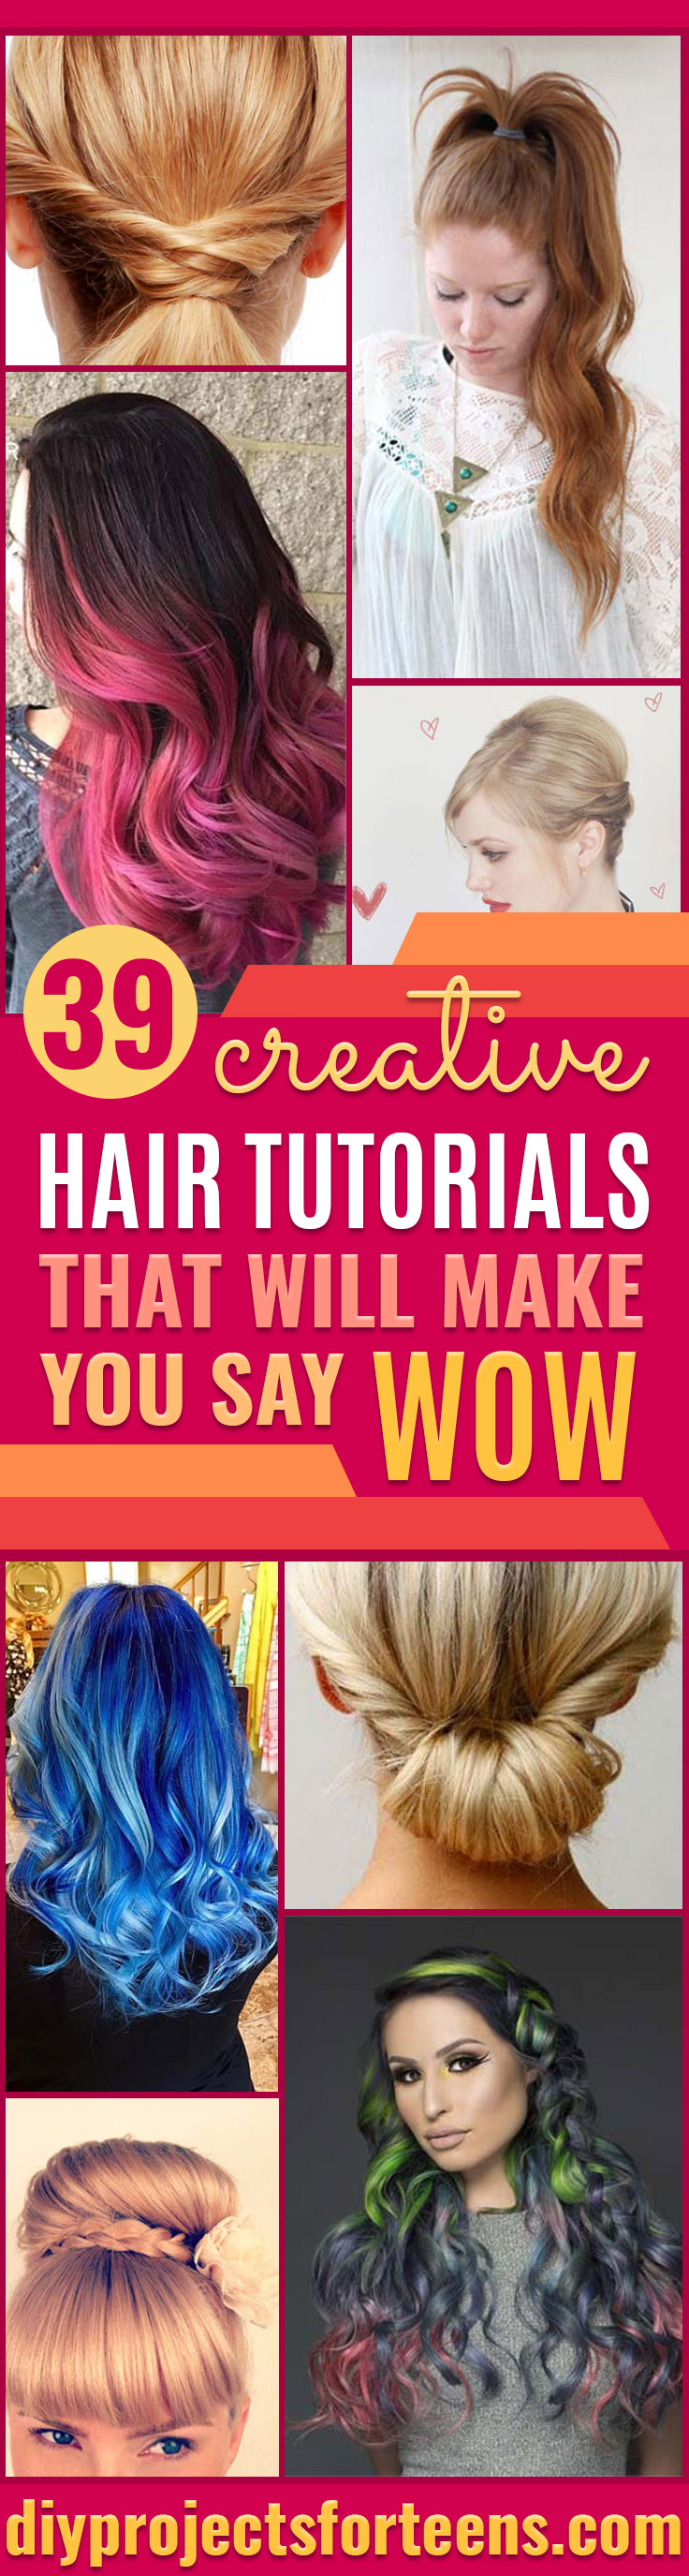 Easy Hair Styling Tutorials - Cool Hair Styles Step By Step - Ideas for Hair Color, Rainbow, Galaxy and Unique Styles for Long, Short and Medium Hair - Braids, Dyes, Instructions for Teens and Women #hairstyles #hairideas #beauty #teens #easyhairstyles